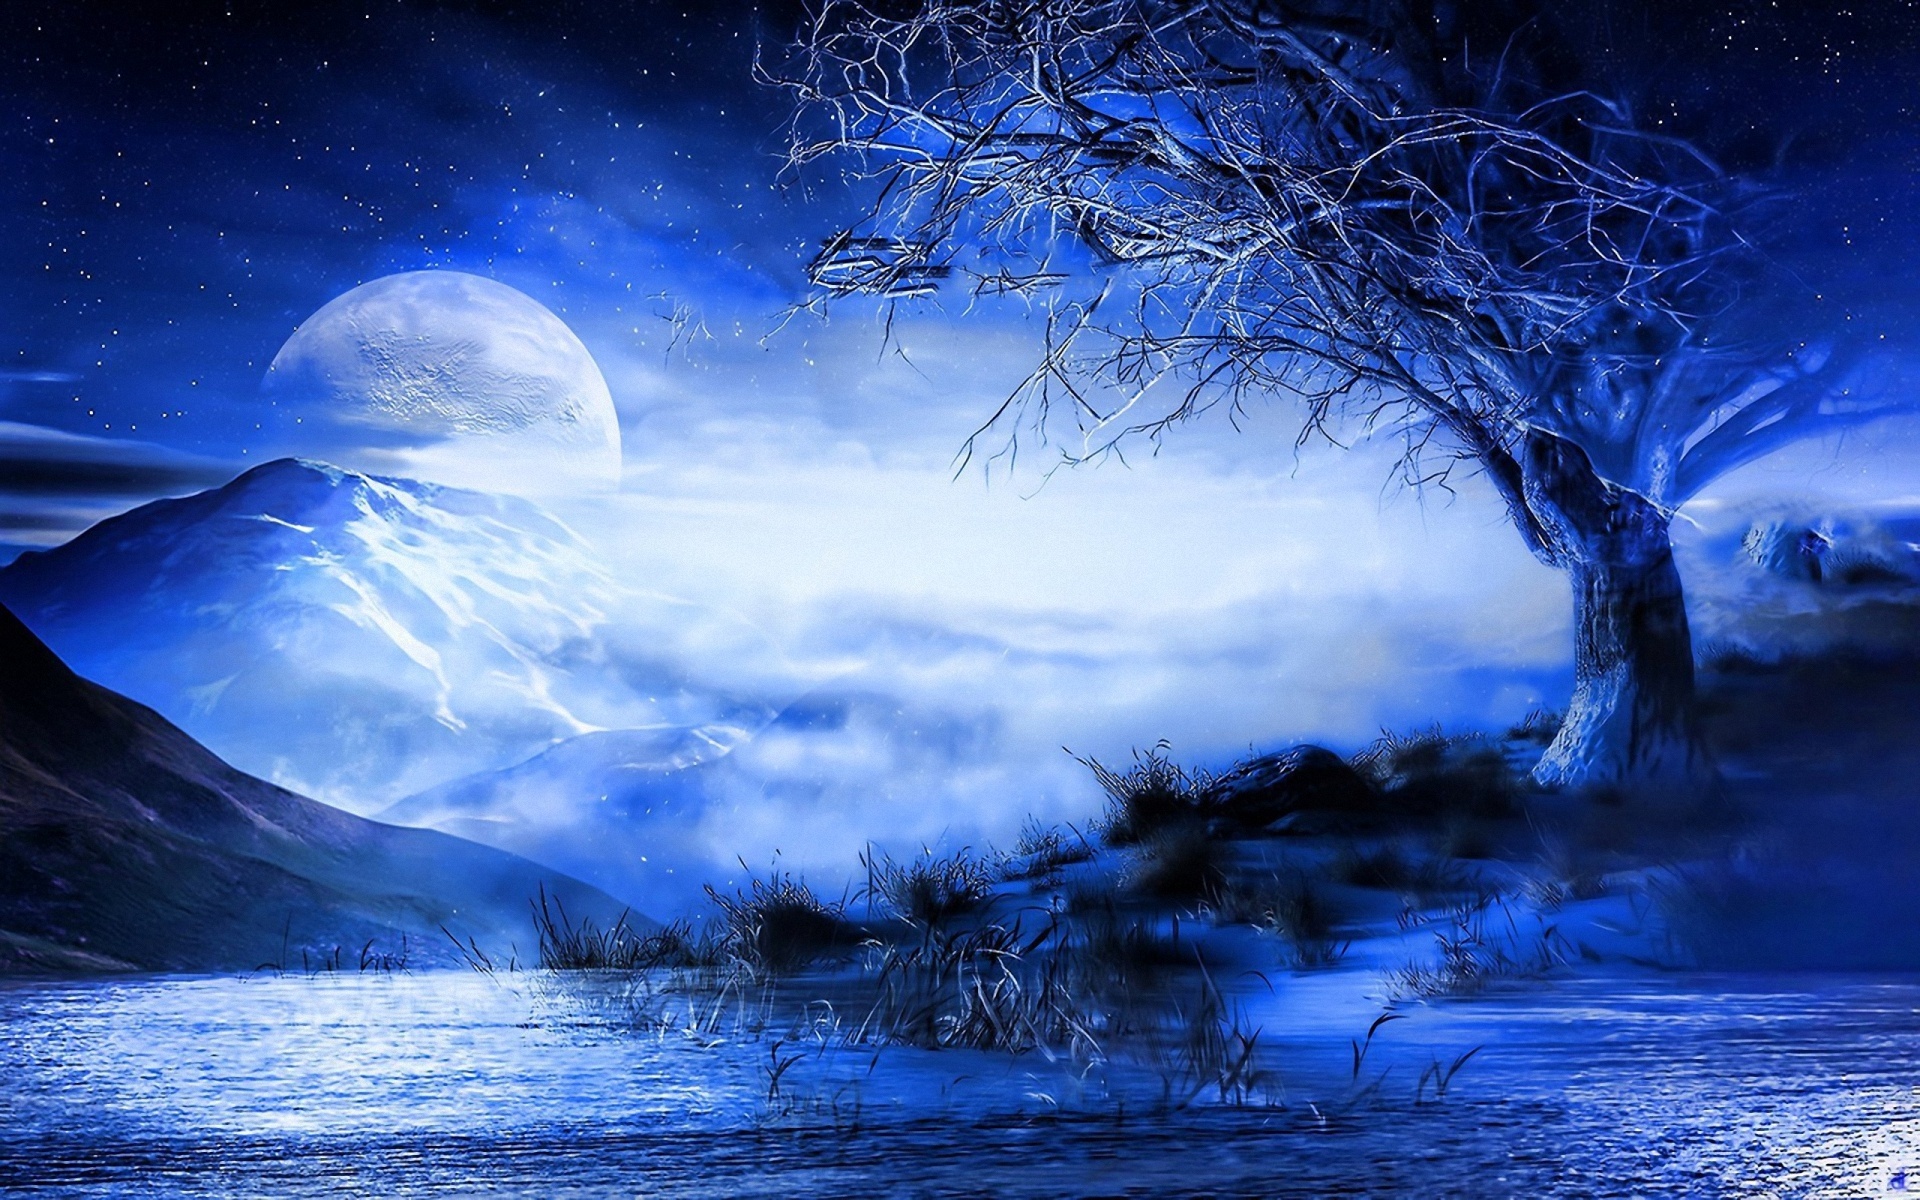 Top 10 most beautiful wallpapers of moon - Wallpaper